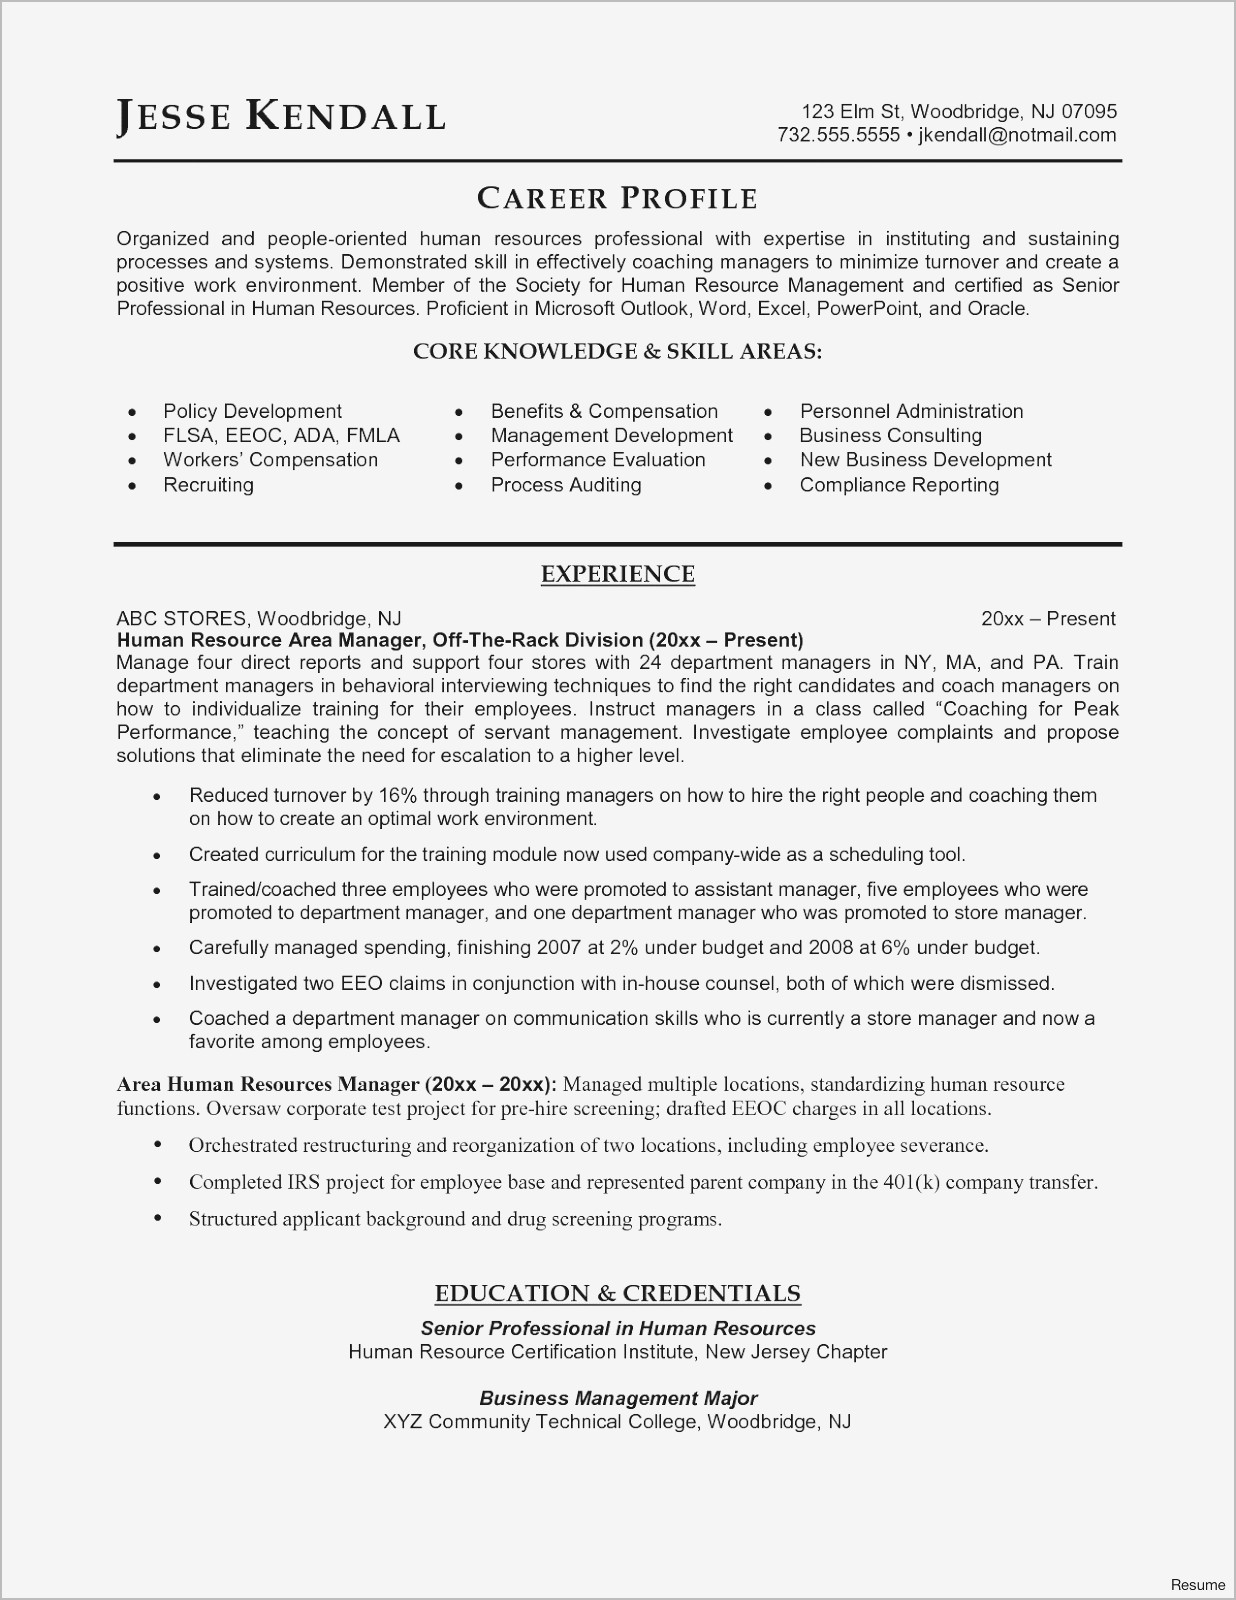 Letter Of Compliance Template - Fresh Letter Outline Template